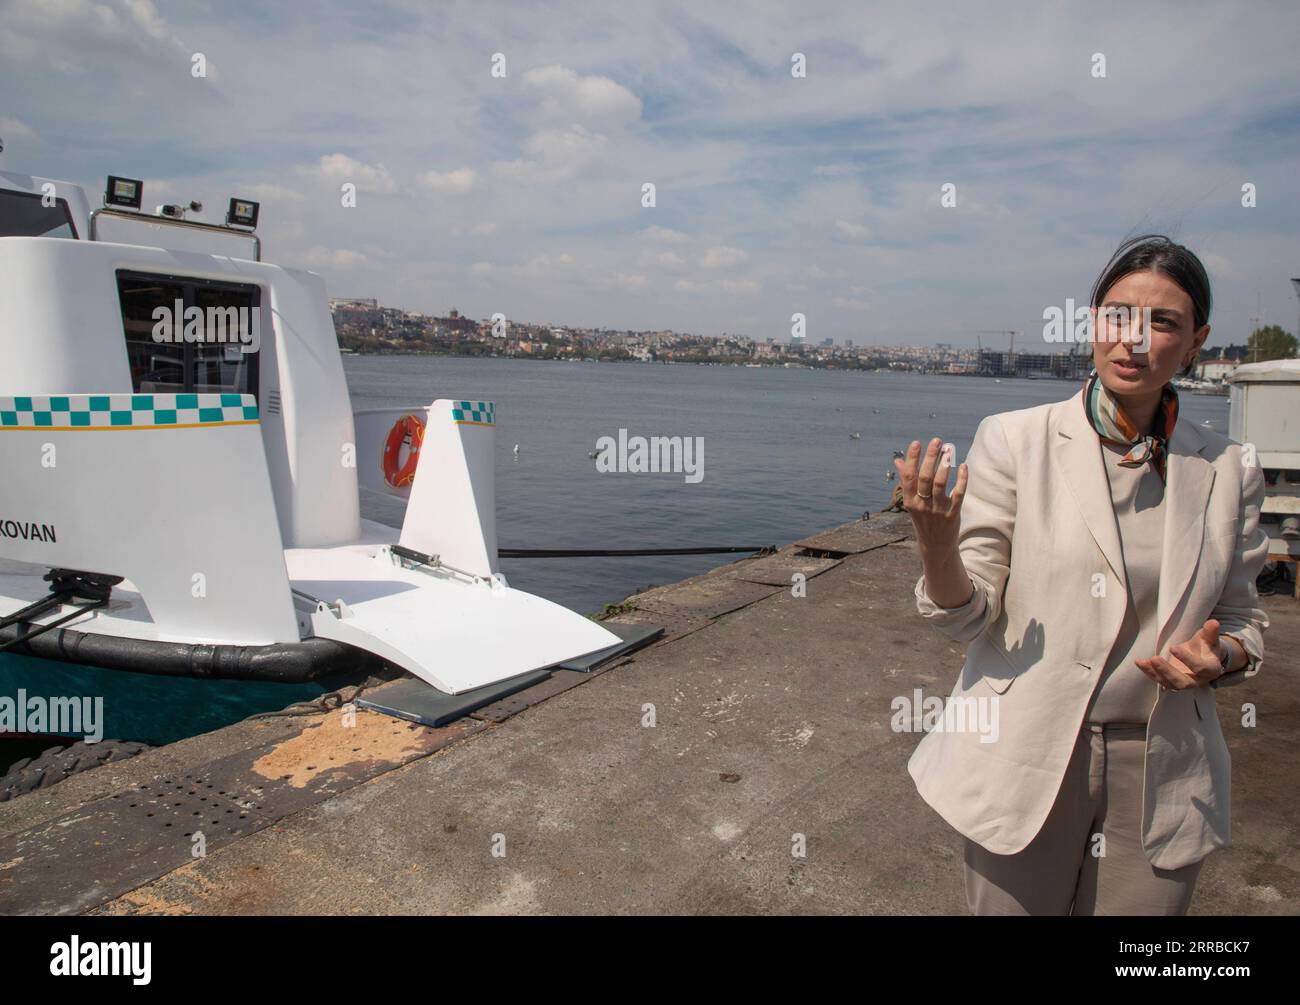 210914 -- ISTANBUL, Sept. 14, 2021 -- Sinem Dedetas speaks during an interview in Istanbul, Turkey, on Sept. 13, 2021. Sinem Dedetas, head of the Istanbul City Lines, is hopeful that the newly produced sea taxis will help ease traffic chaos in the city. Photo by /Xinhua TO GO WITH Feature: Sea taxis expected to ease traffic jams in Turkey s Istanbul TURKEY-ISTANBUL-SEA TAXI OsmanxOrsal PUBLICATIONxNOTxINxCHN Stock Photo